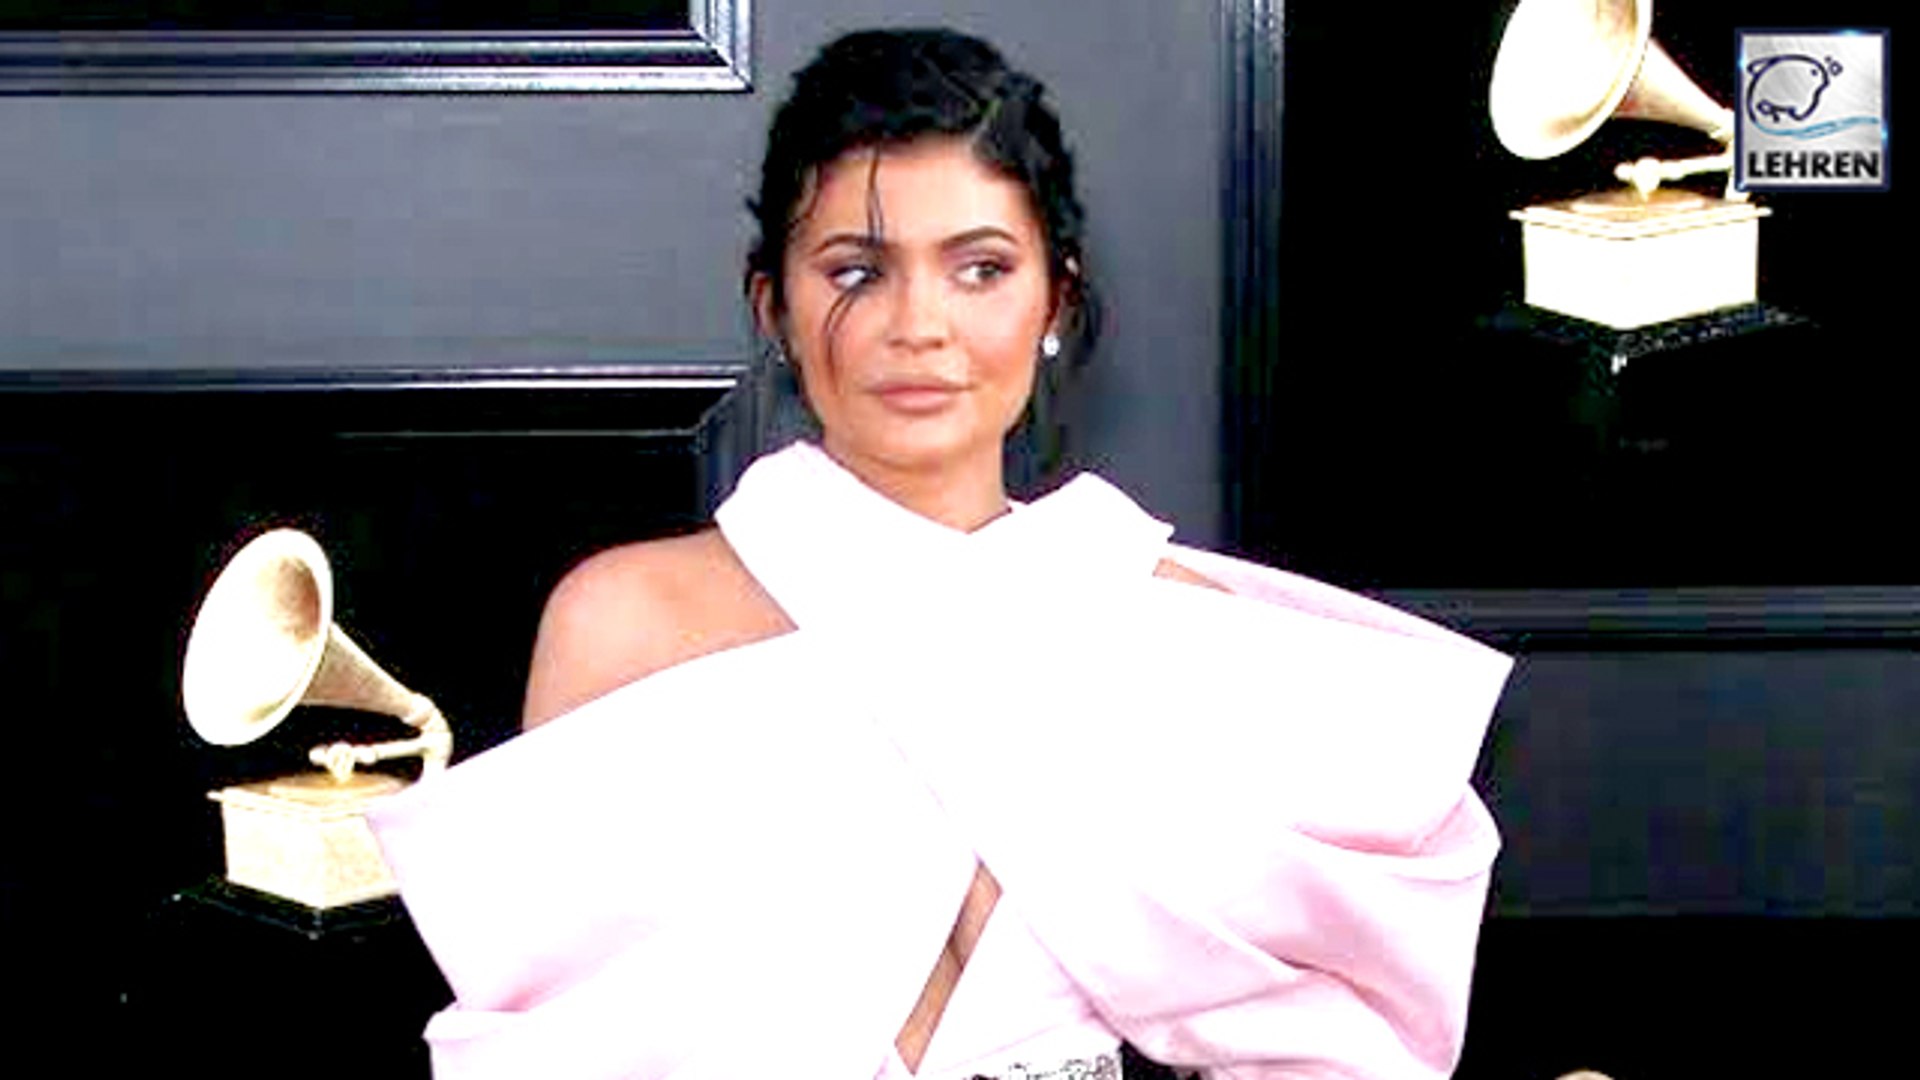 Kylie Jenner Finally Reveals She Is Not A ‘Self Made’ Billionaire